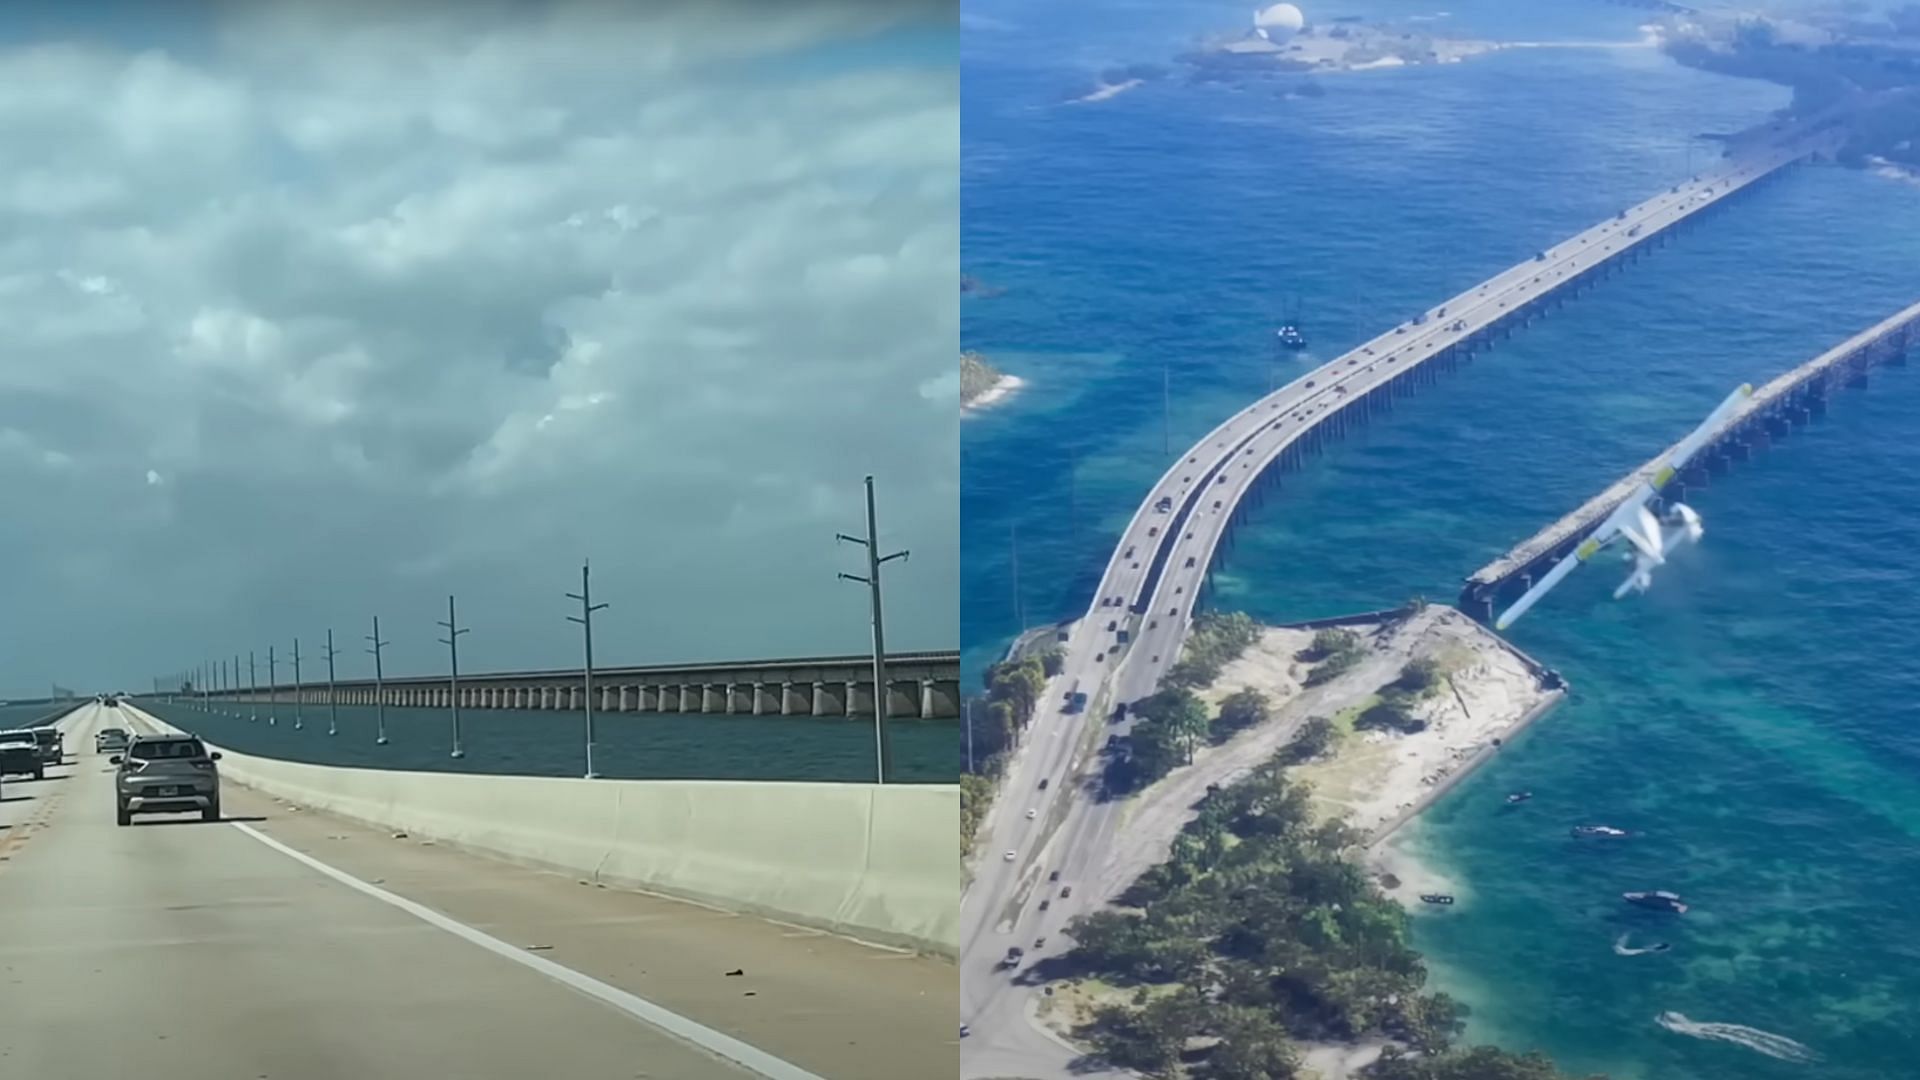 The Florida Keys area as seen in the trailer. (Images via YouTube/@JoelFrancoVlogs, Rockstar Games)